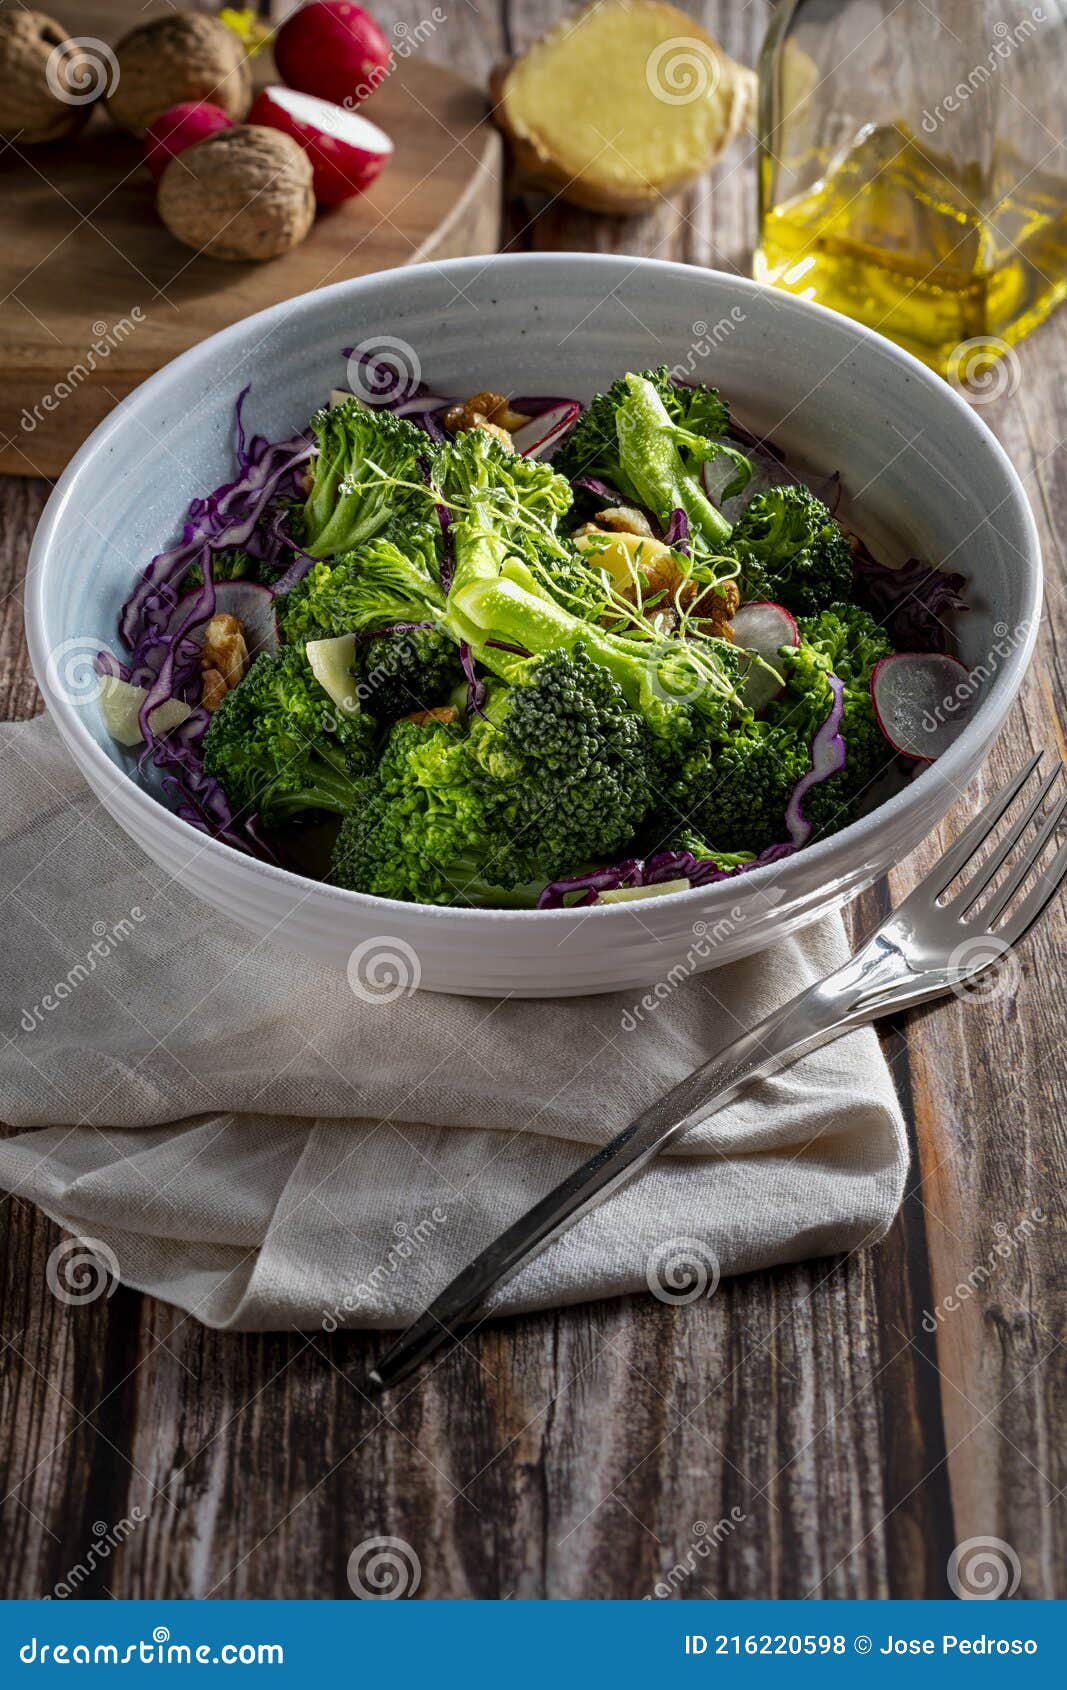 plate with a healthy vegetarian salad of steamed broccoli, fresh radishes, walnuts, red cabbage, ginger and extra virgin olive oil